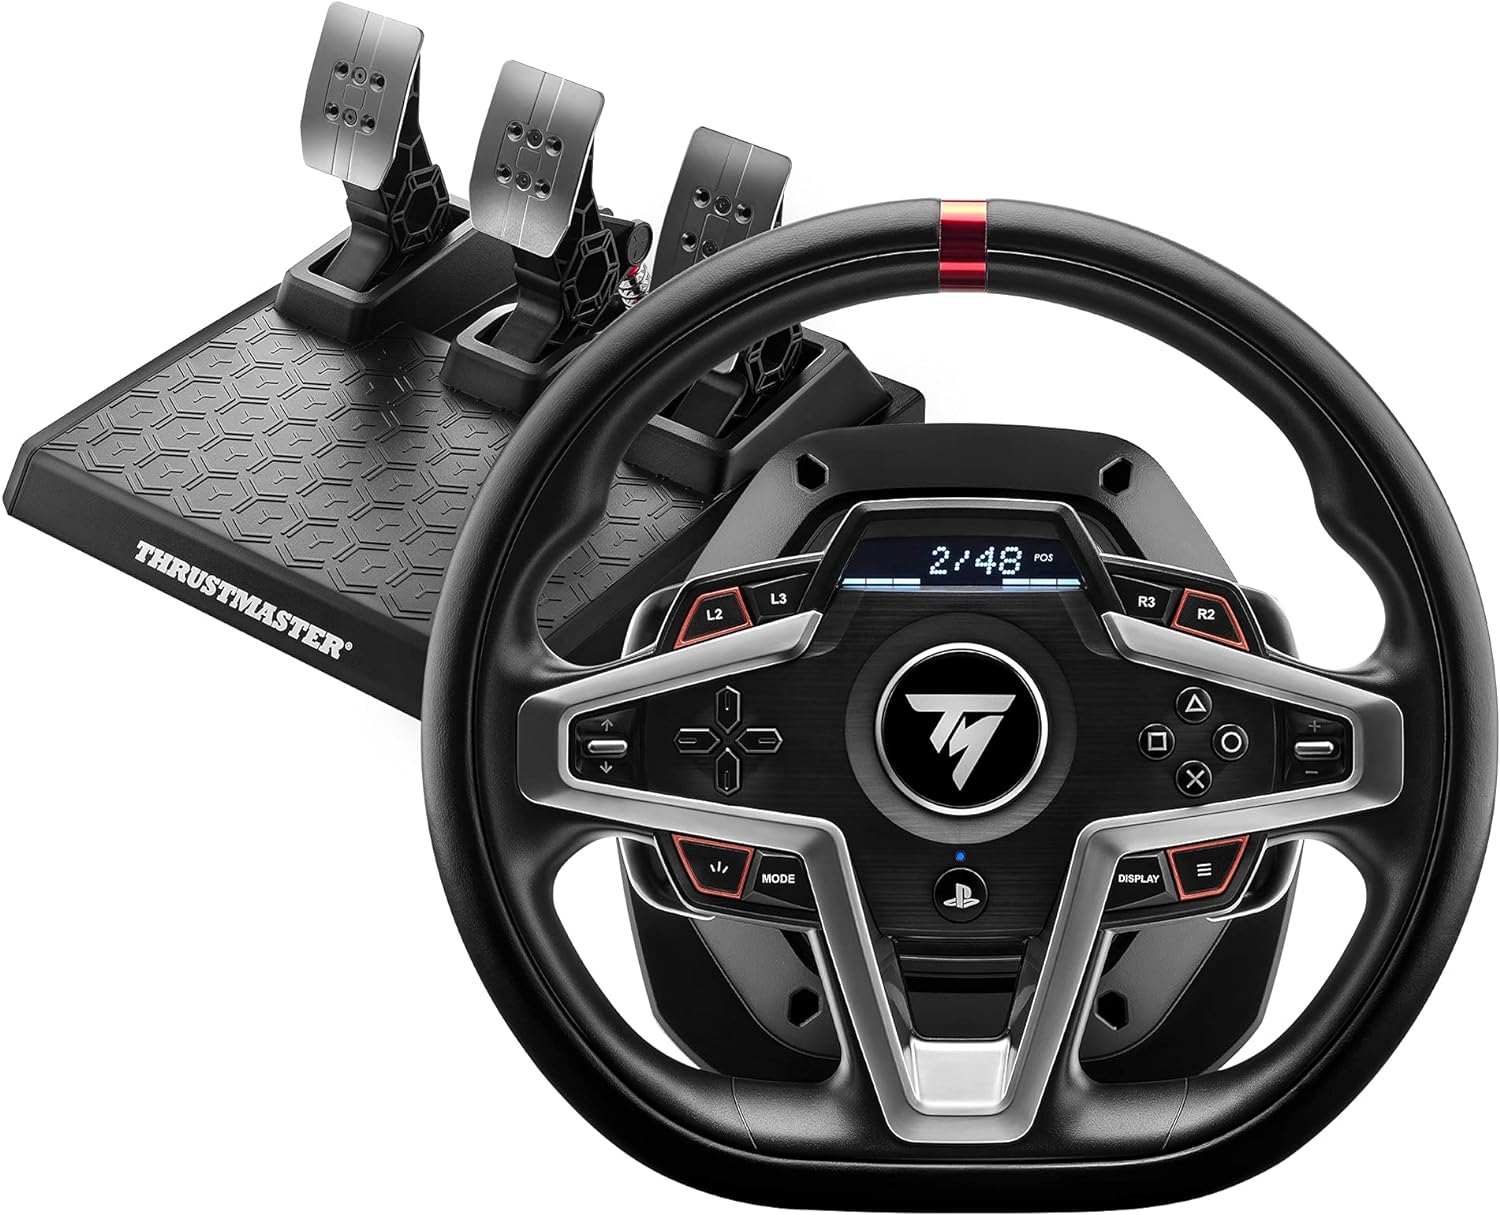 JOYPAD CONTROLLER FOR DRIVING SIMULATORS, Thrustmaster T248 Steering Wheel For PS5/PS4 PC + PEDAL BOARD 